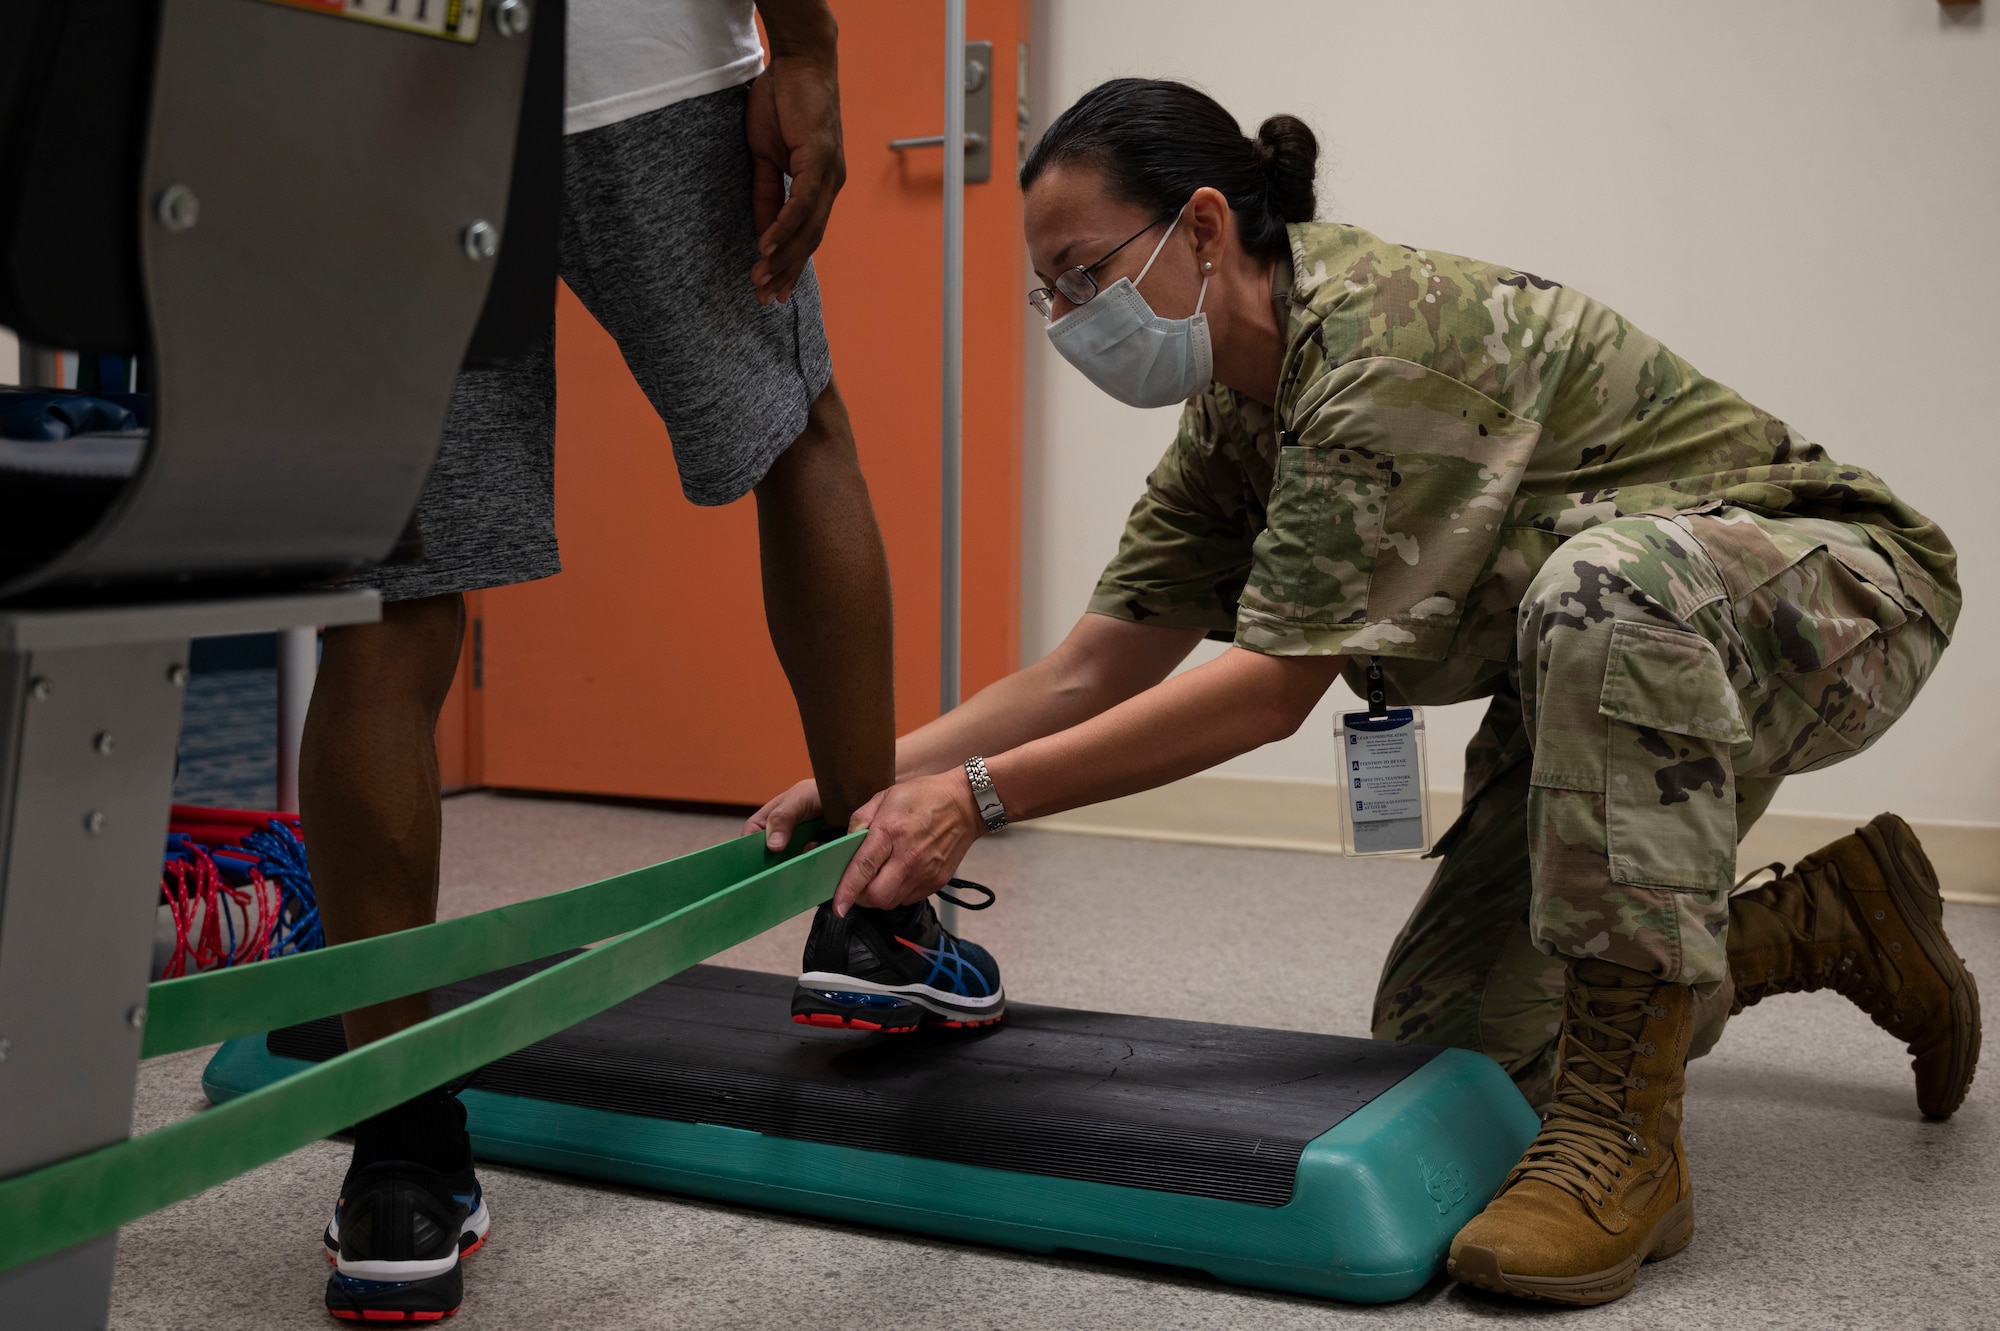 U.S. Air Force Staff Sgt. Monica Rivera, 36th Medical Group Physical Therapy Clinic noncommissioned officer in charge, assists a patient with putting on a TheraBand before performing closed kinetic chain ankle mobilization exercises at the PT Clinic on Andersen Air Force Base, Guam, Sept. 7, 2022. A customized PT plan helps ensure a patient's return to prior level of functioning so they can contribute to the mission to the best of their ability. (U.S. Air Force photo by Airman 1st Class Lauren Clevenger)